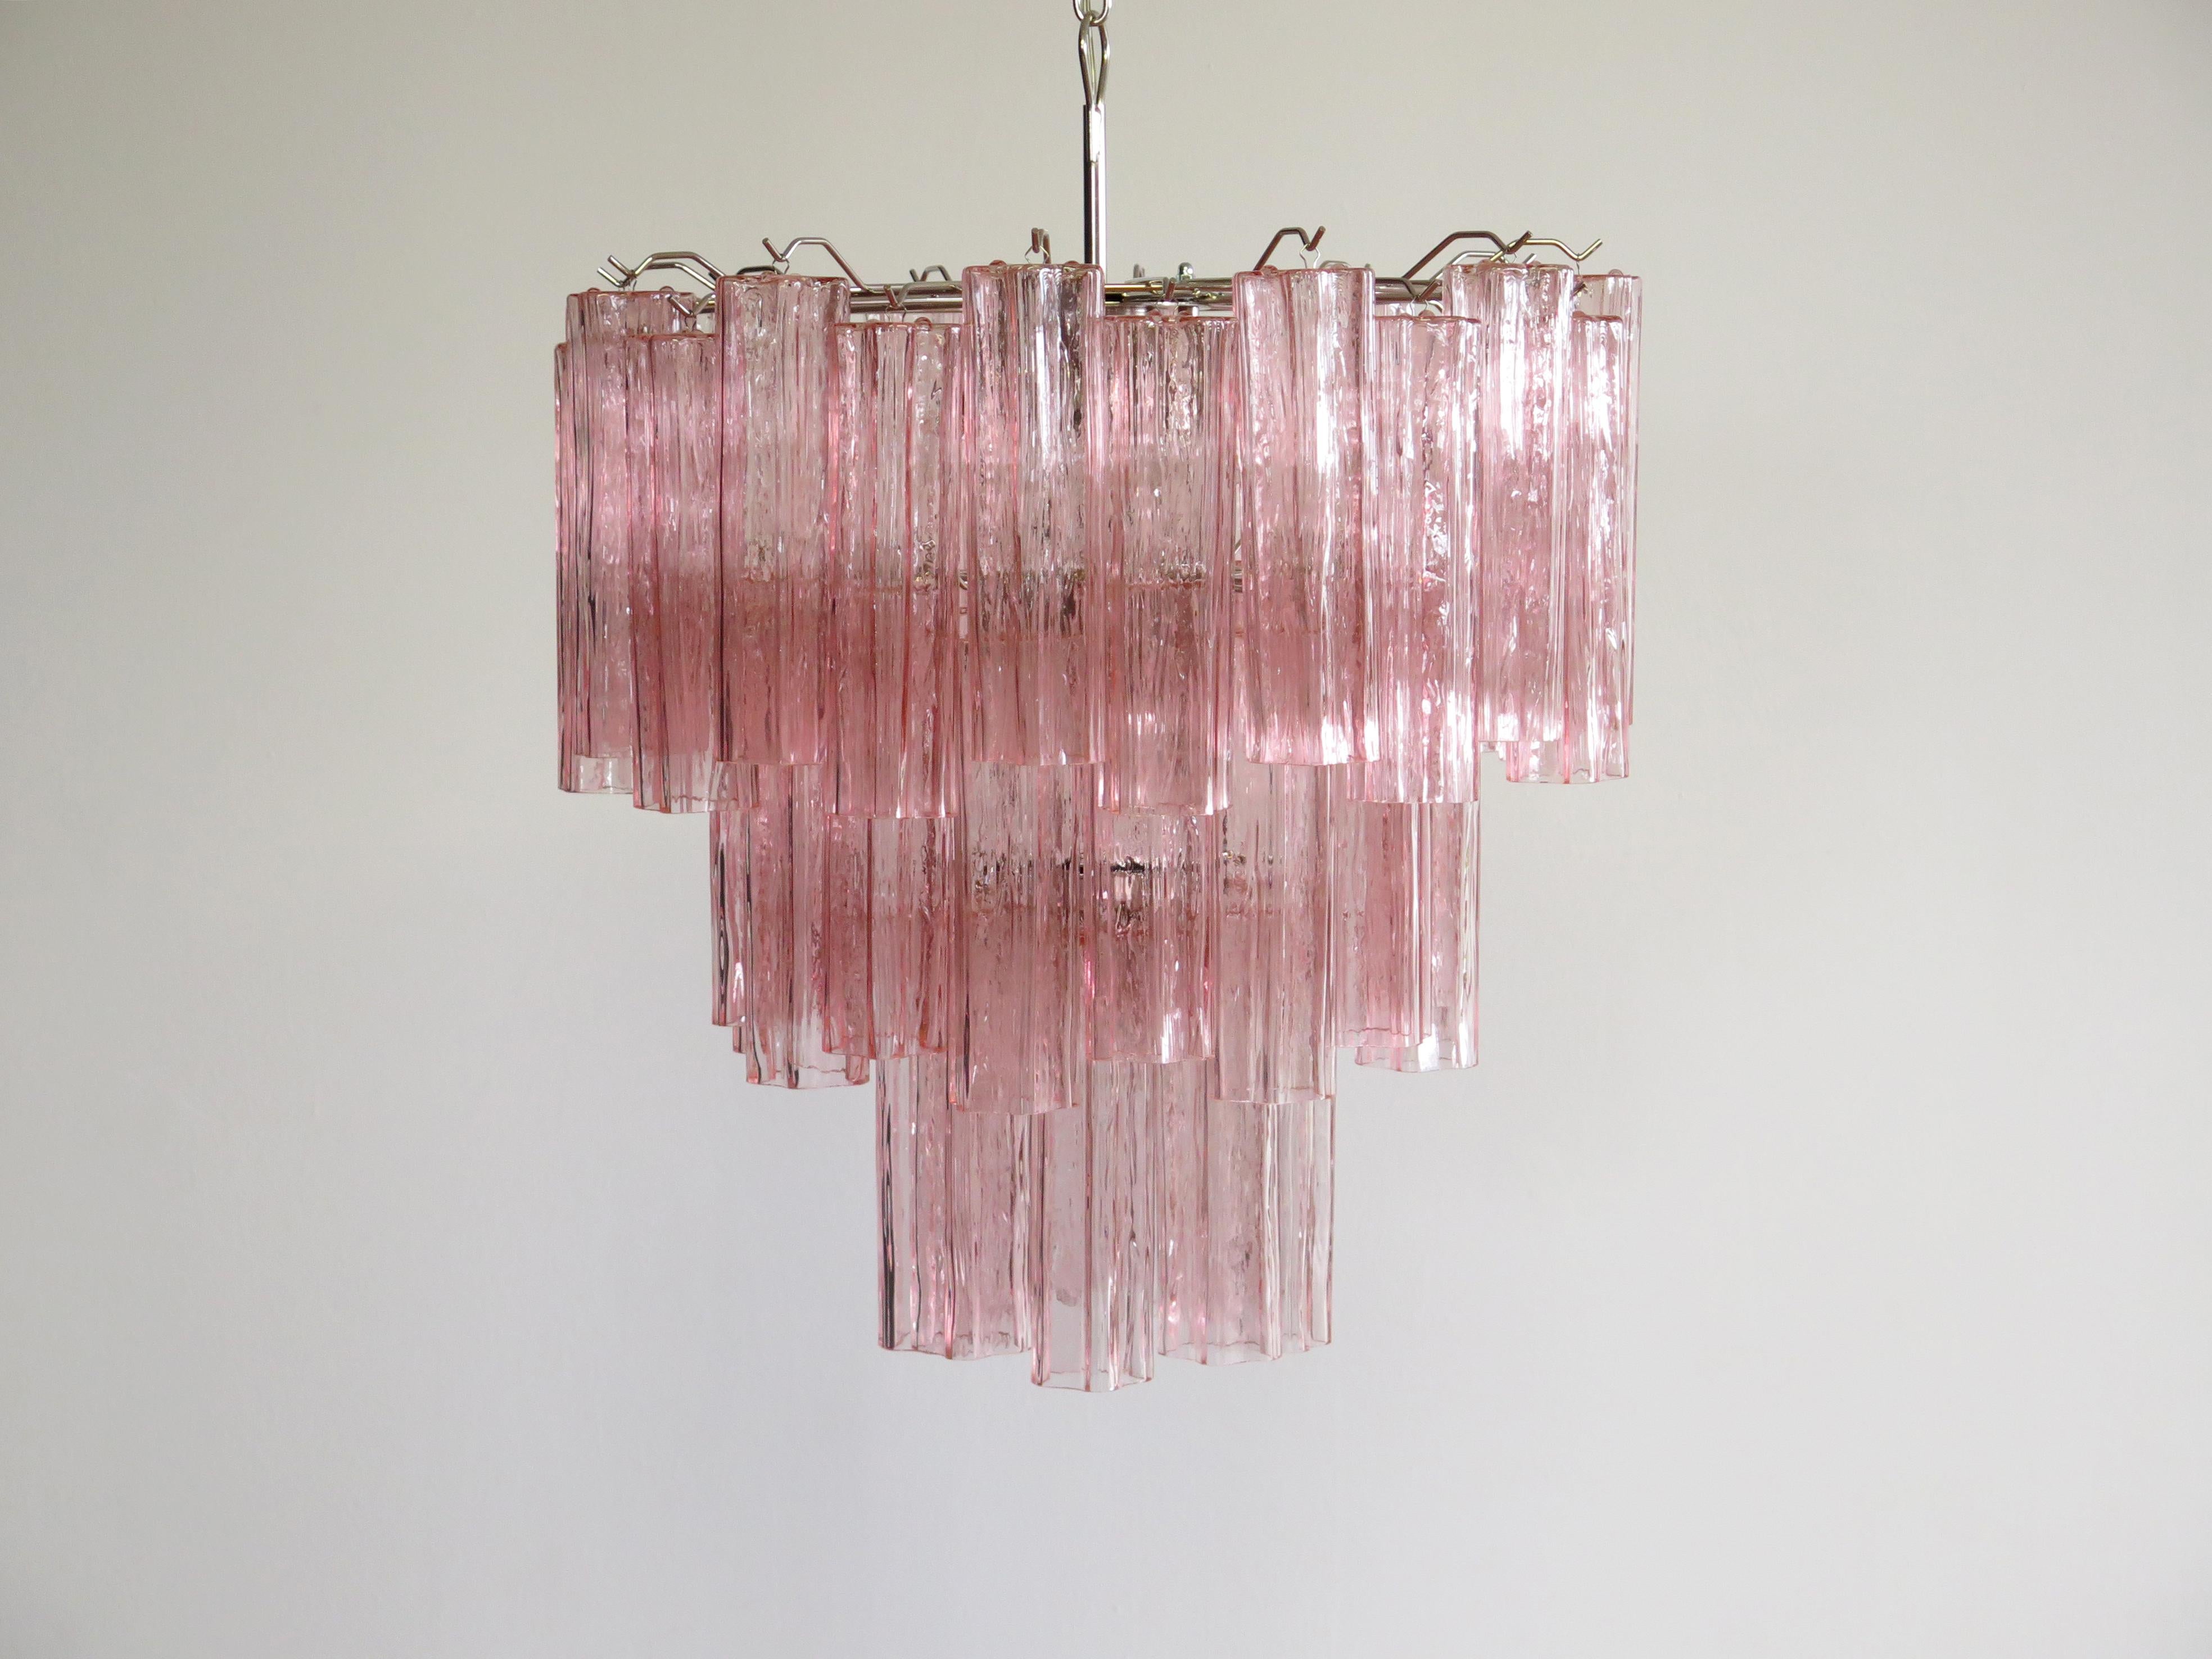 Italian vintage chandelier in Murano glass and nickel-plated metal structure. The armor polished nickel supports 48 large pink glass tubes in a star shape. The glasses have a beautiful color, object of rare beauty.
Period: 1980s
Dimensions: 55.10